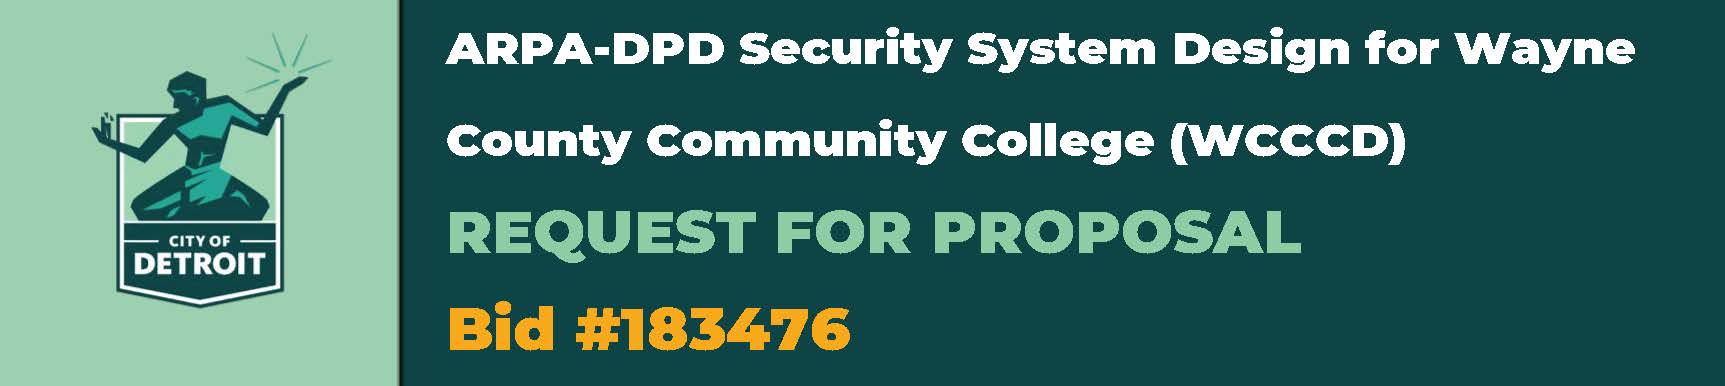 ARPA-DPD Security System Design for Wayne County Community College (WCCCD)